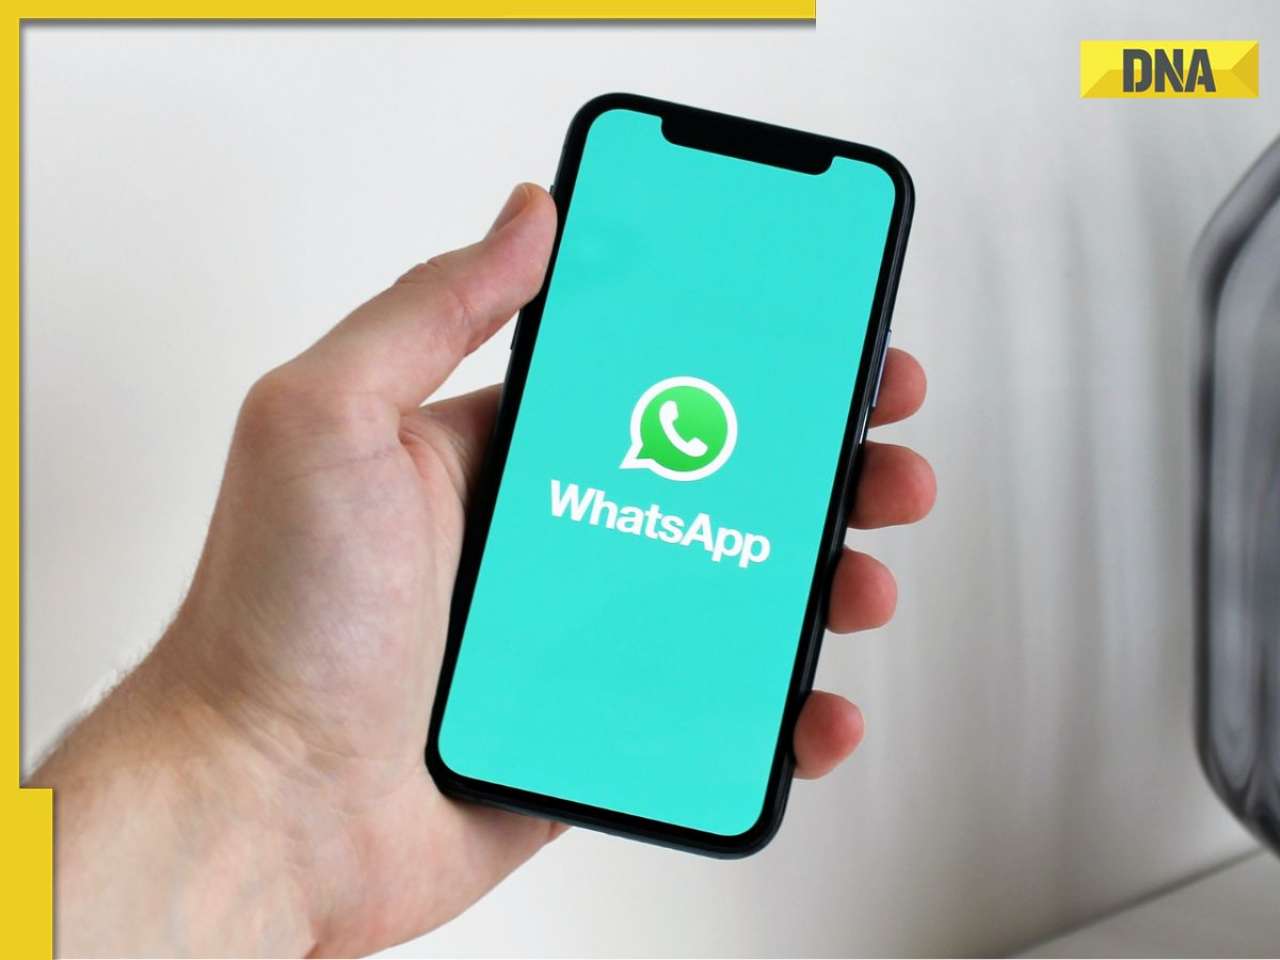 WhatsApp users to soon get these new interesting features, testing underway